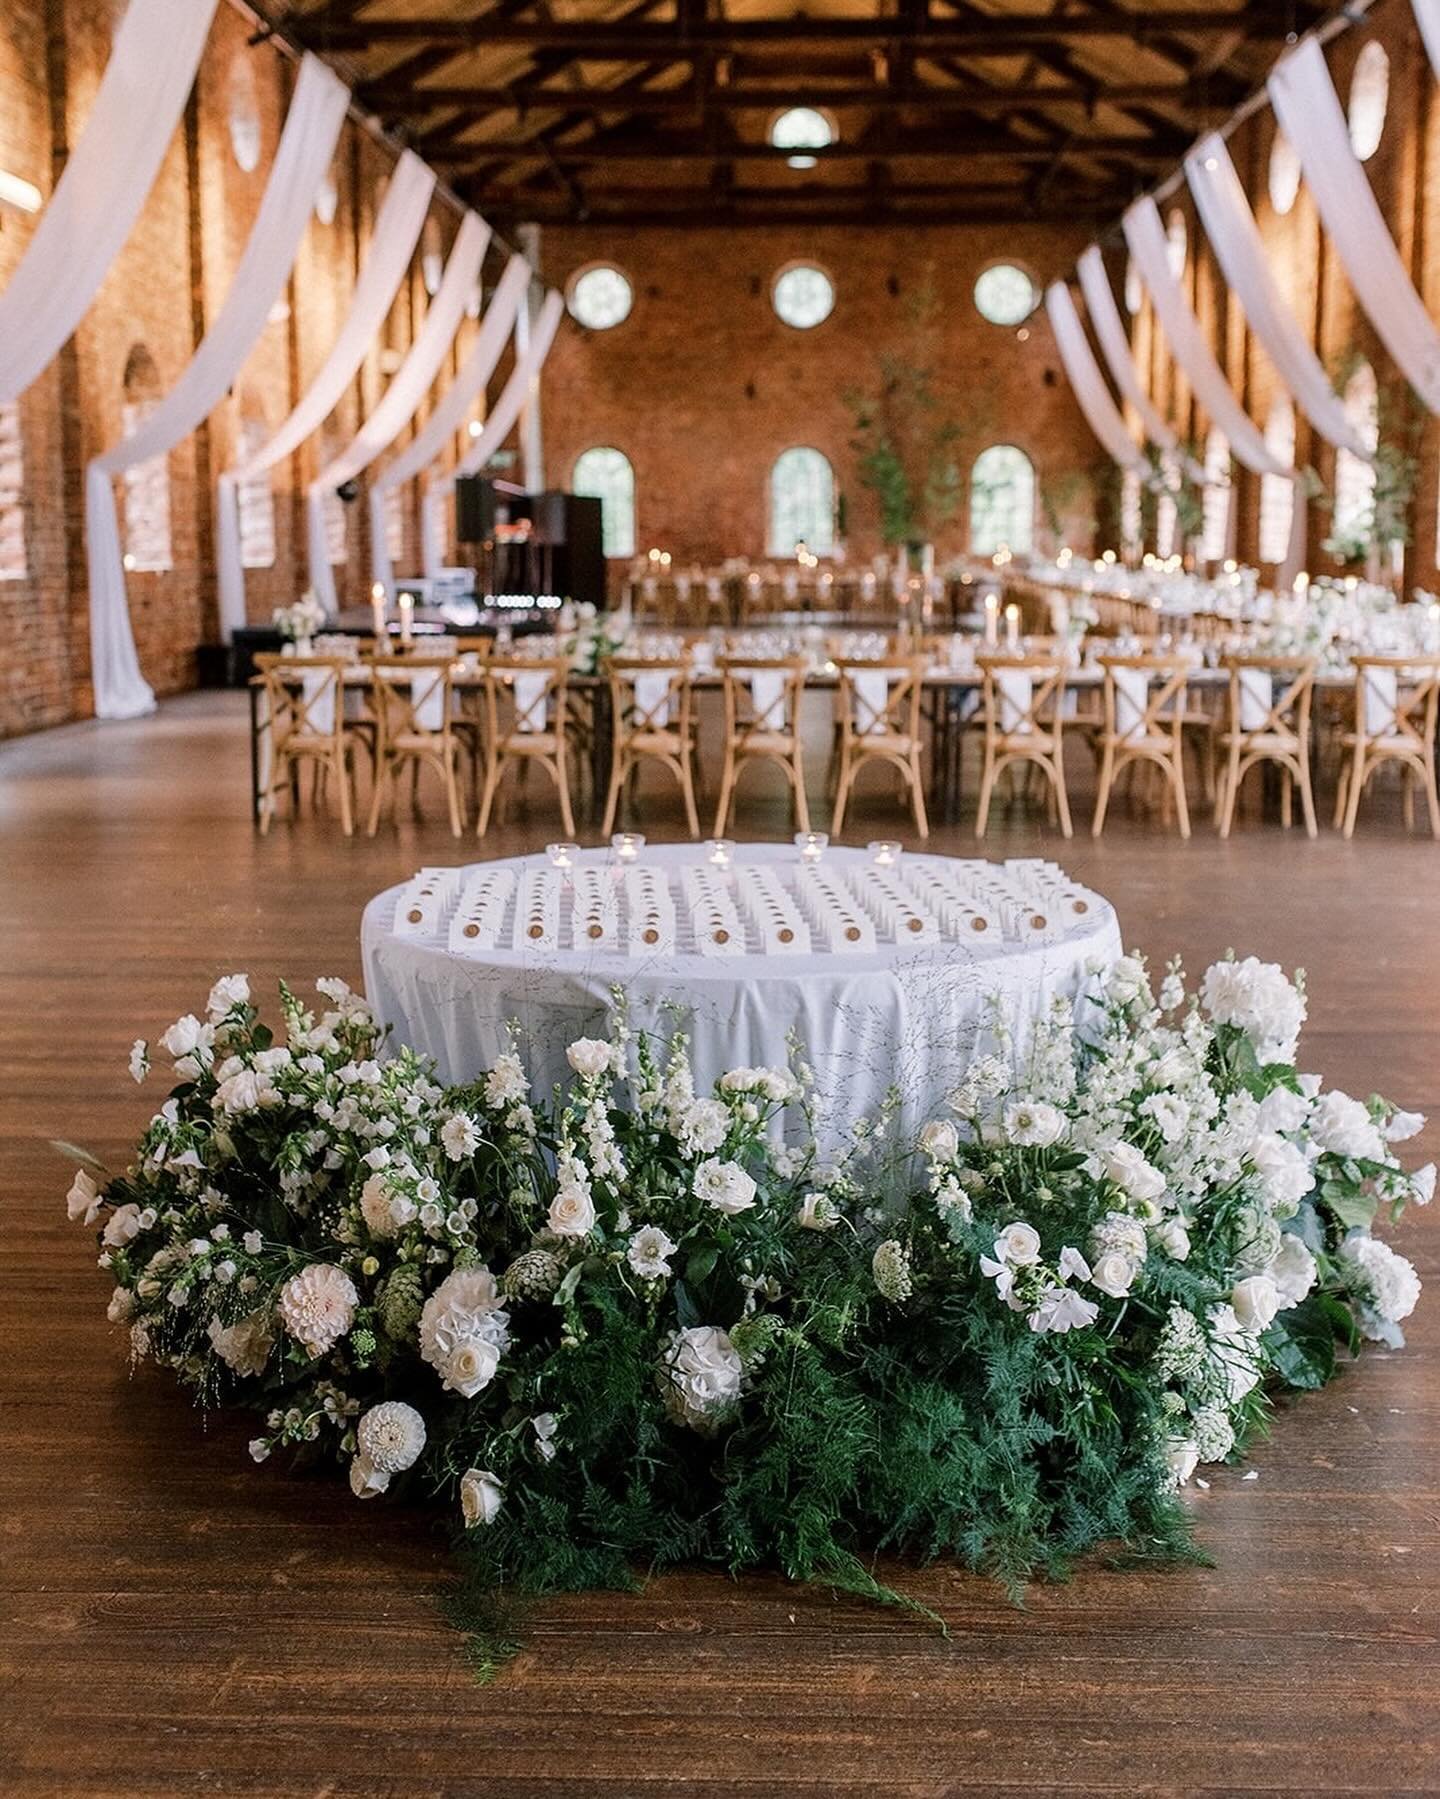 A wow welcome to find your seat
⠀⠀⠀⠀⠀⠀⠀⠀⠀
Photos @weddingsbylina
Planning, design &amp; stationery @isabellasevent
Venue @winterviken
Florals @bloomspourmoi